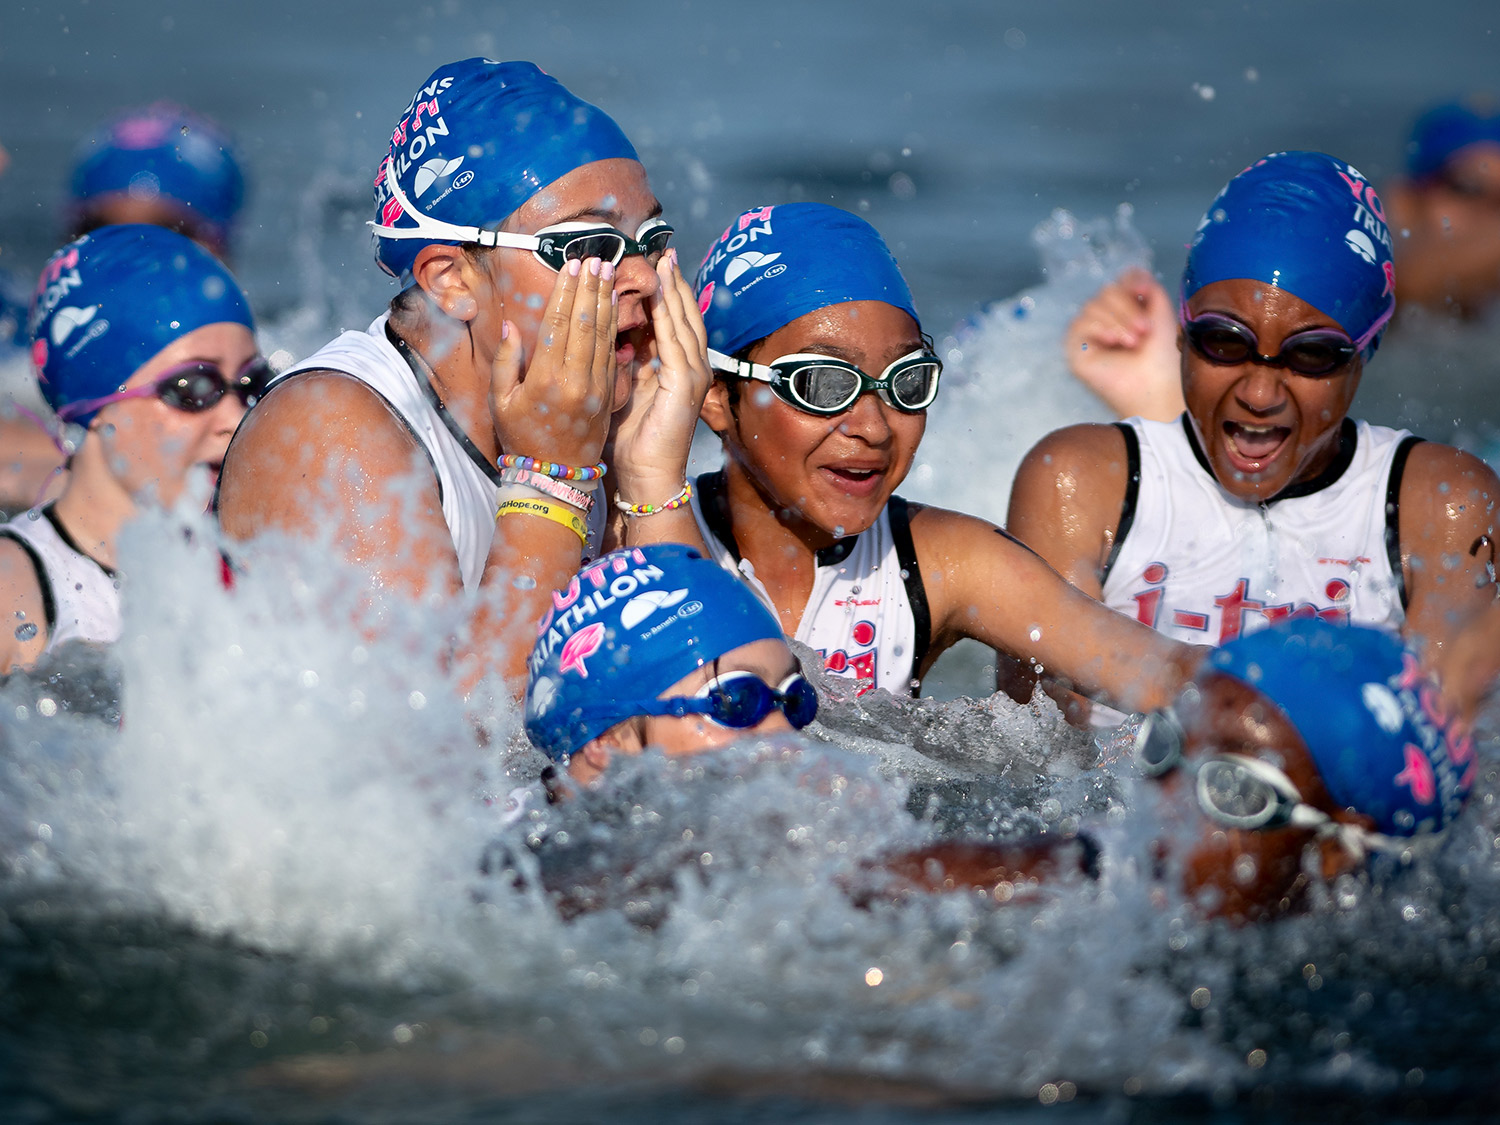 Youth and Sprint Triathlons Enlivened the Weekend | The East Hampton Star